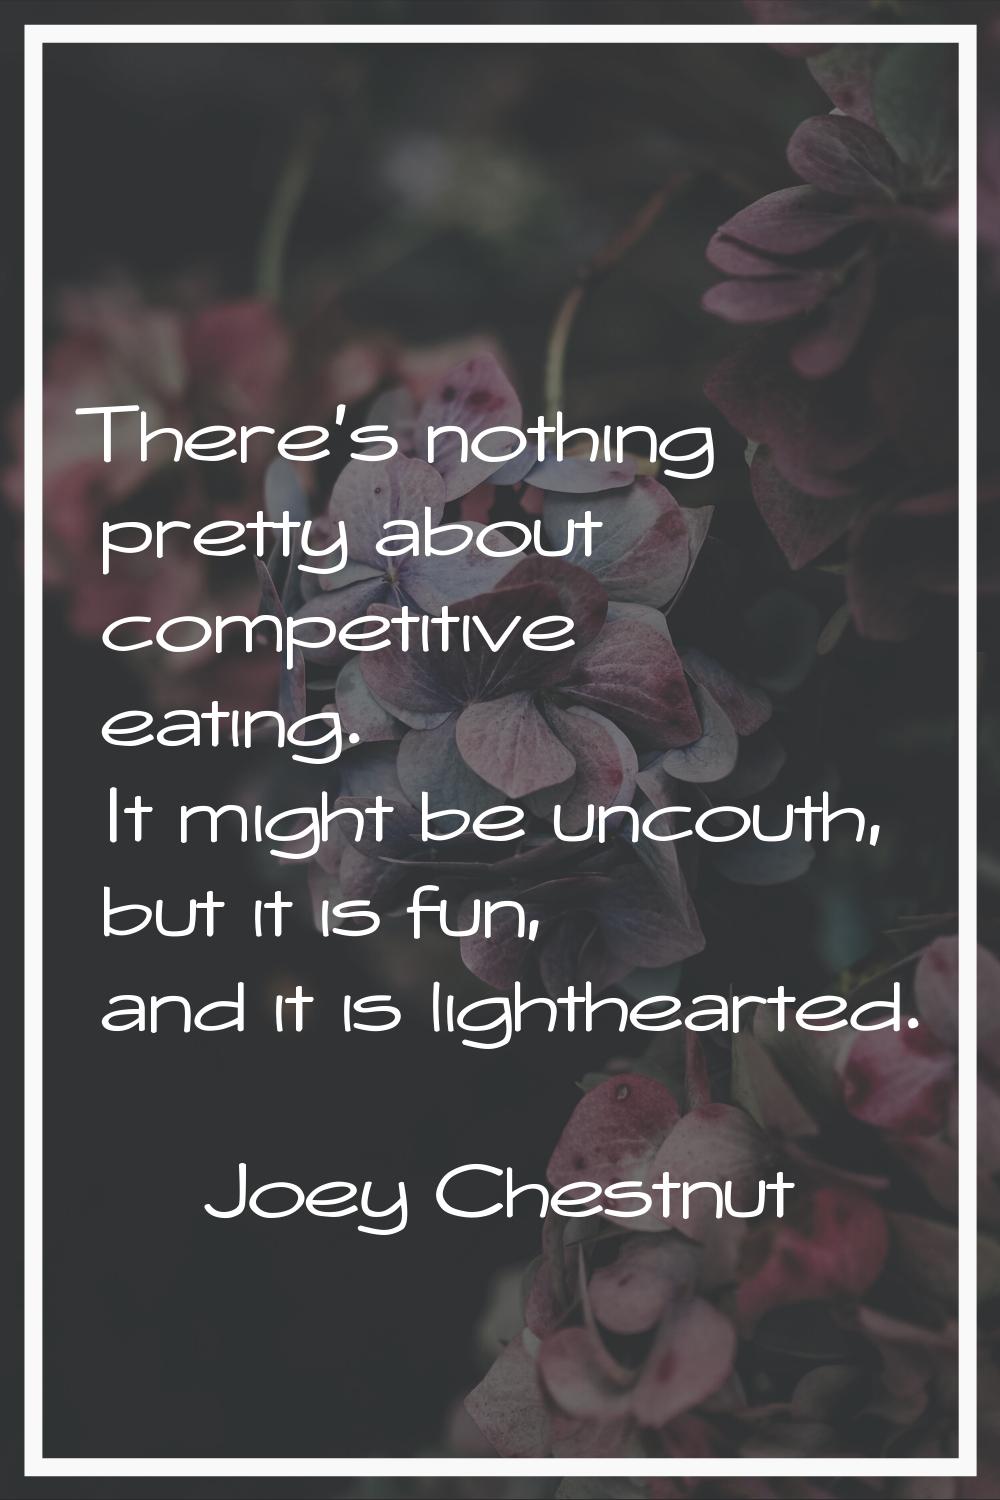 There's nothing pretty about competitive eating. It might be uncouth, but it is fun, and it is ligh